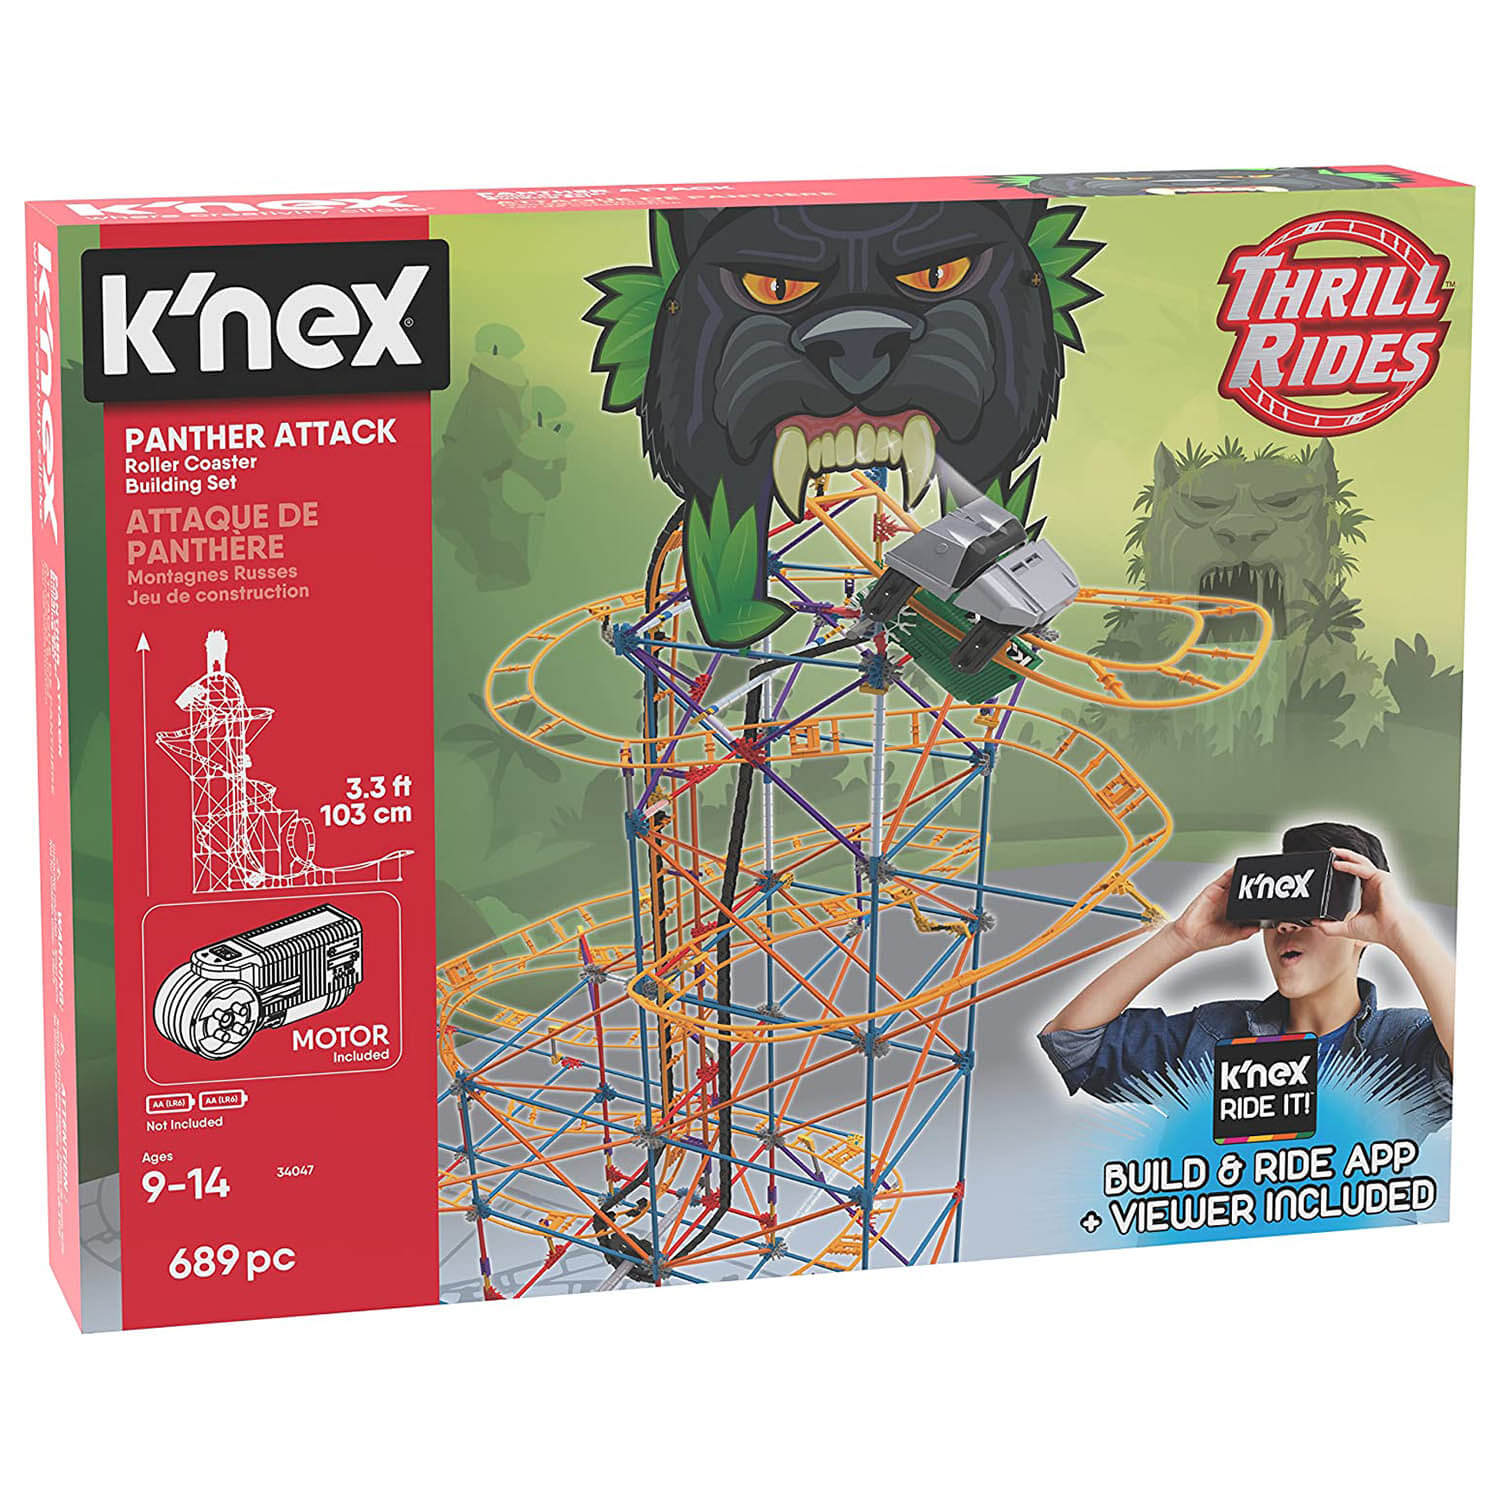 Front view of the K'Nex Thrill Rides Panther Attack Roller Coaster Building Set package.